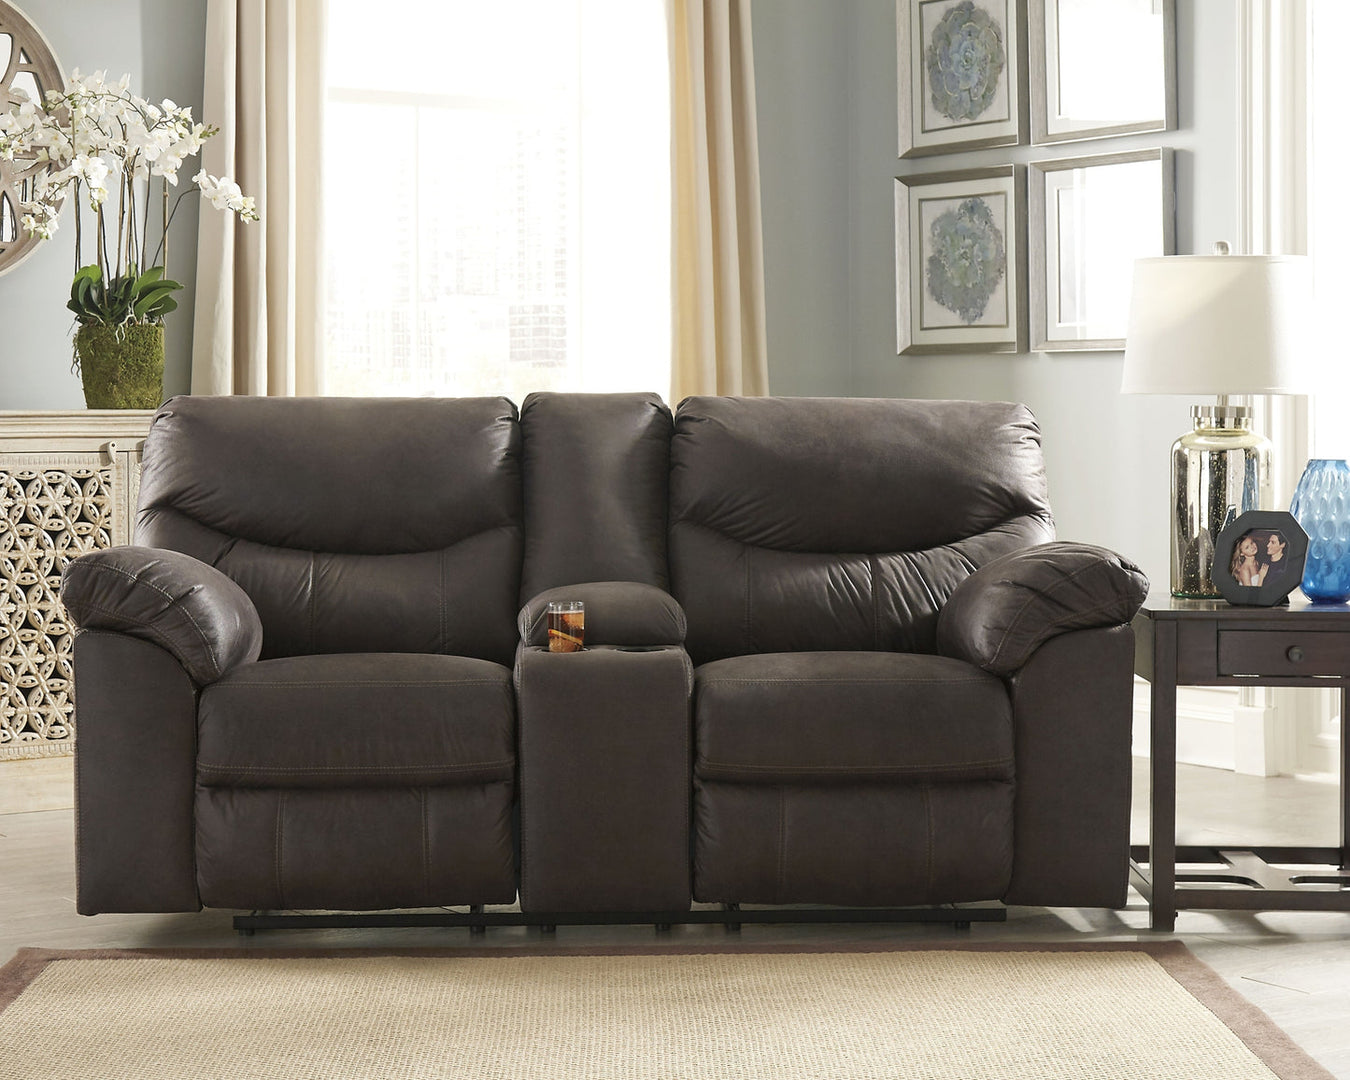 Shop Reclining Love Seats at JR Furniture Store in Fayetteville, NC 28311